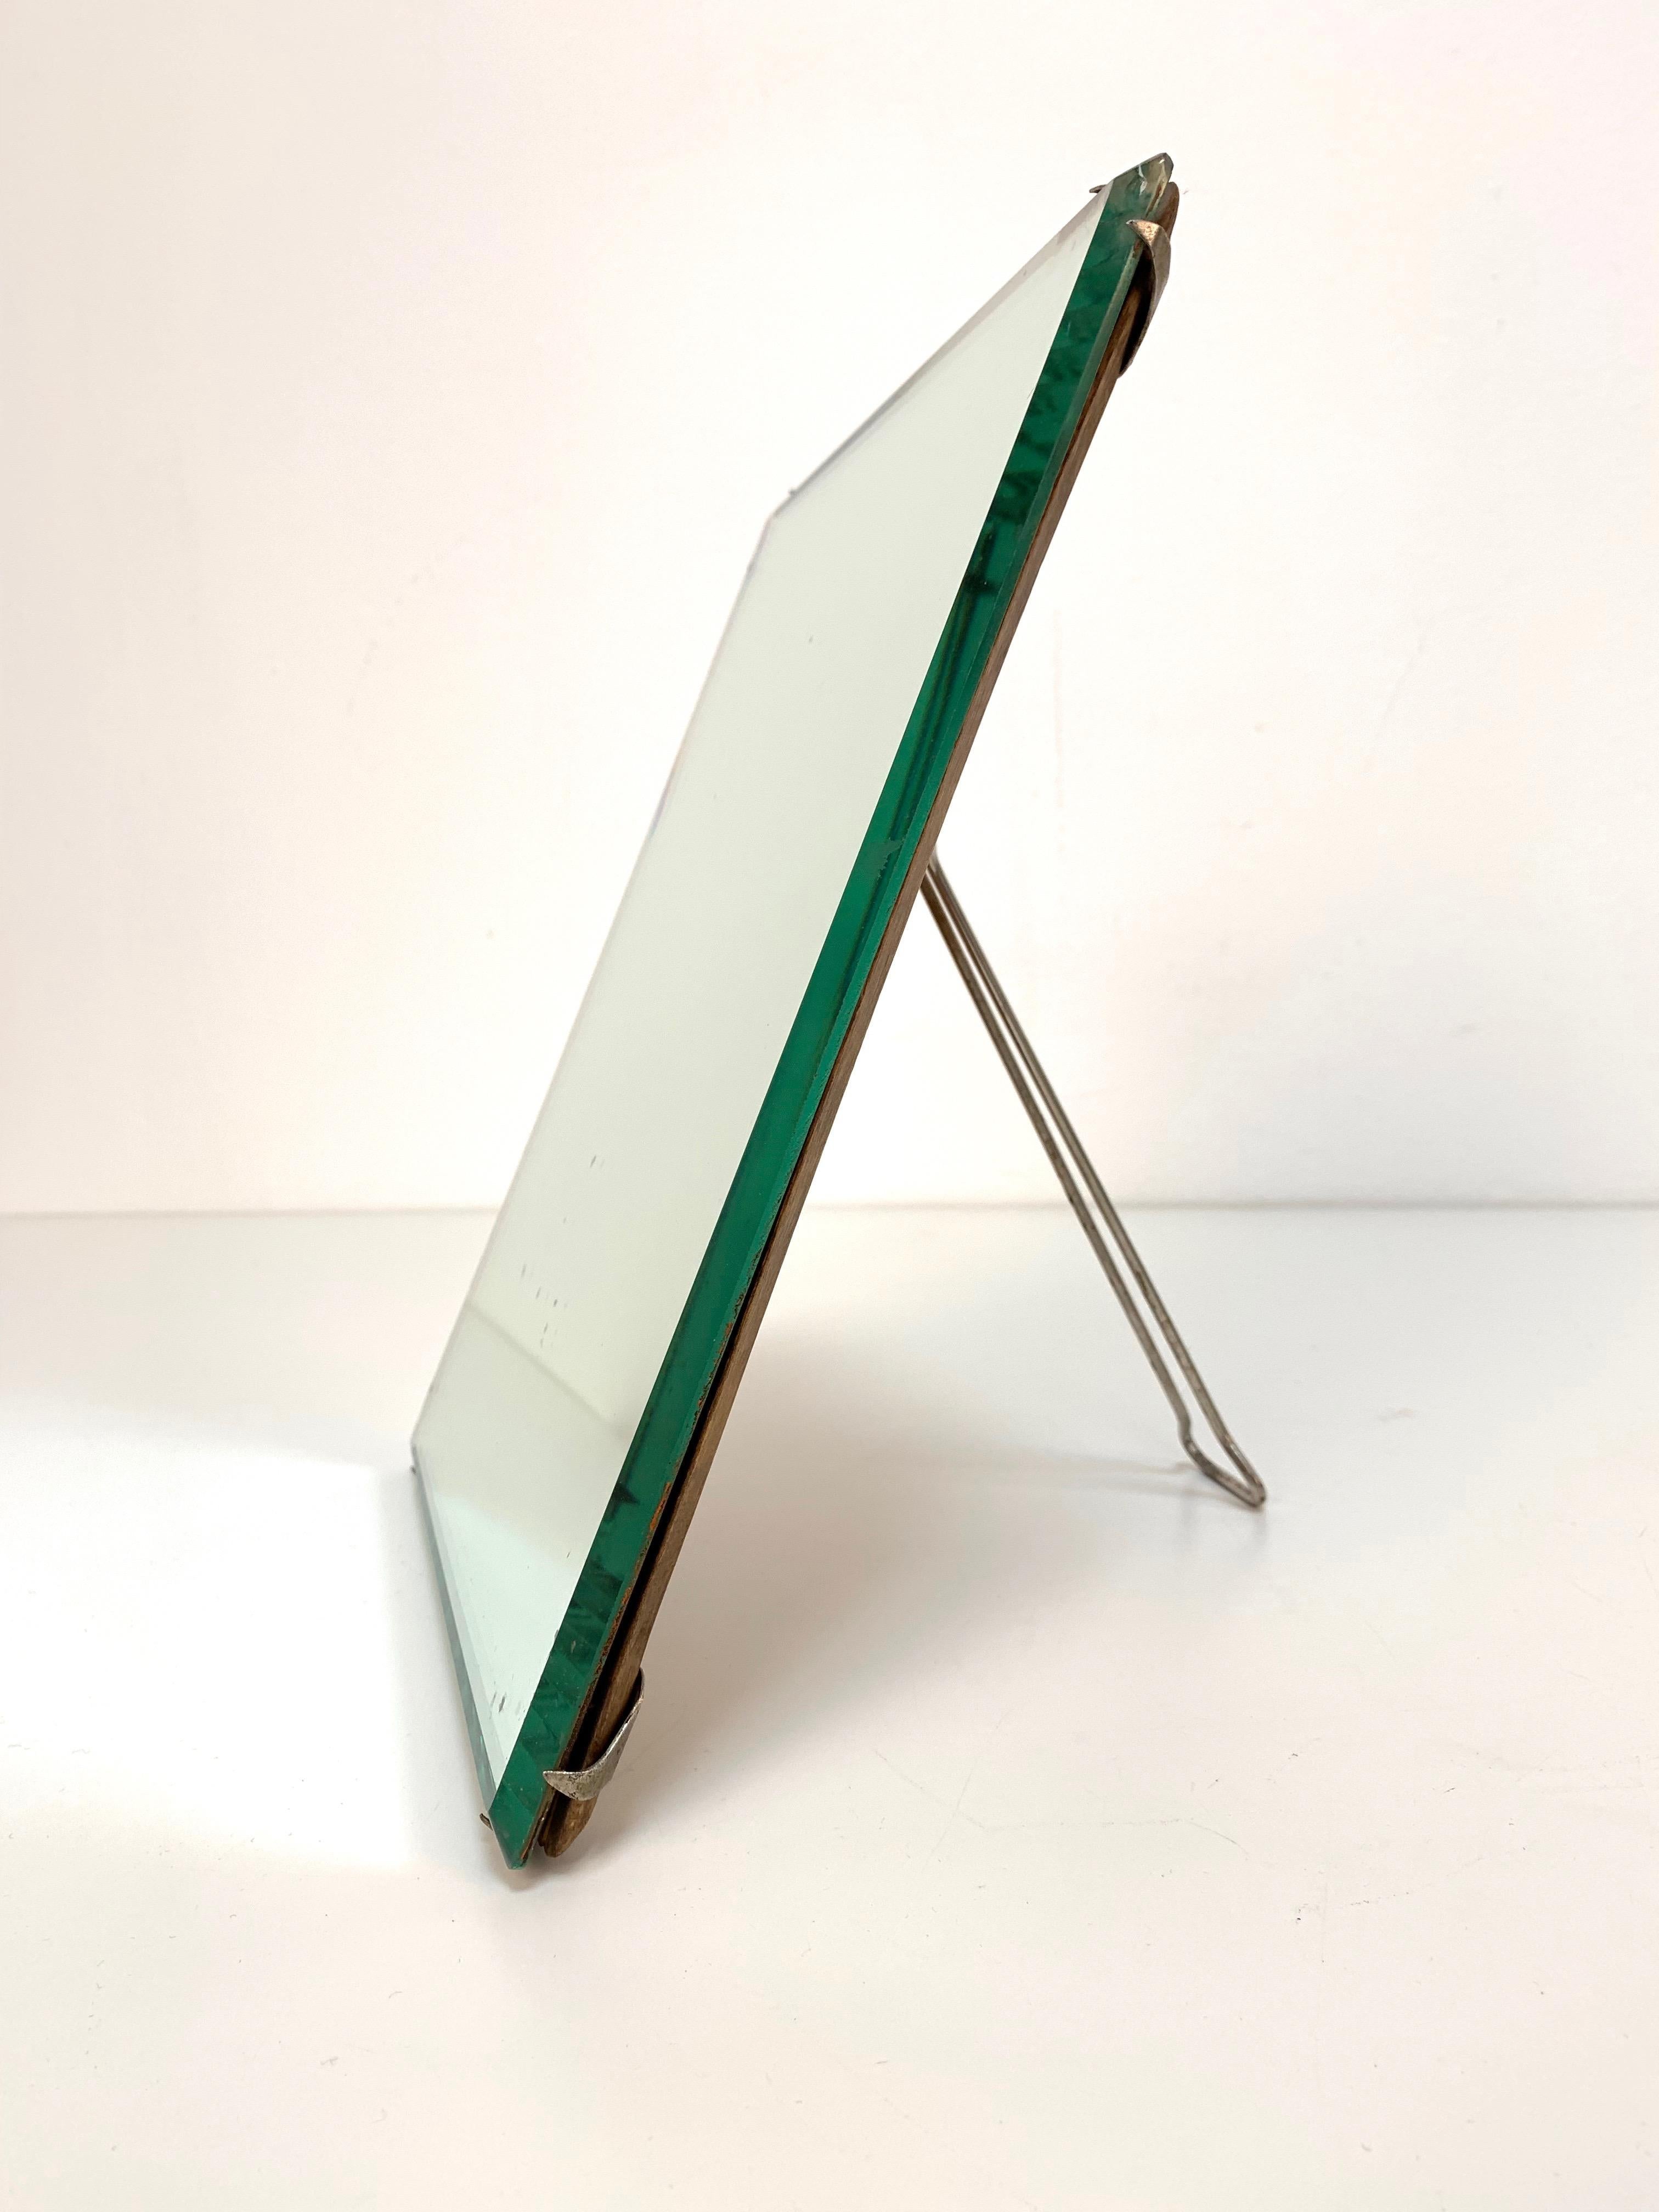 Metal Italian Mid-Century Table Mirror in Wood and Iron by Luigi Fontana &C, 1940s For Sale